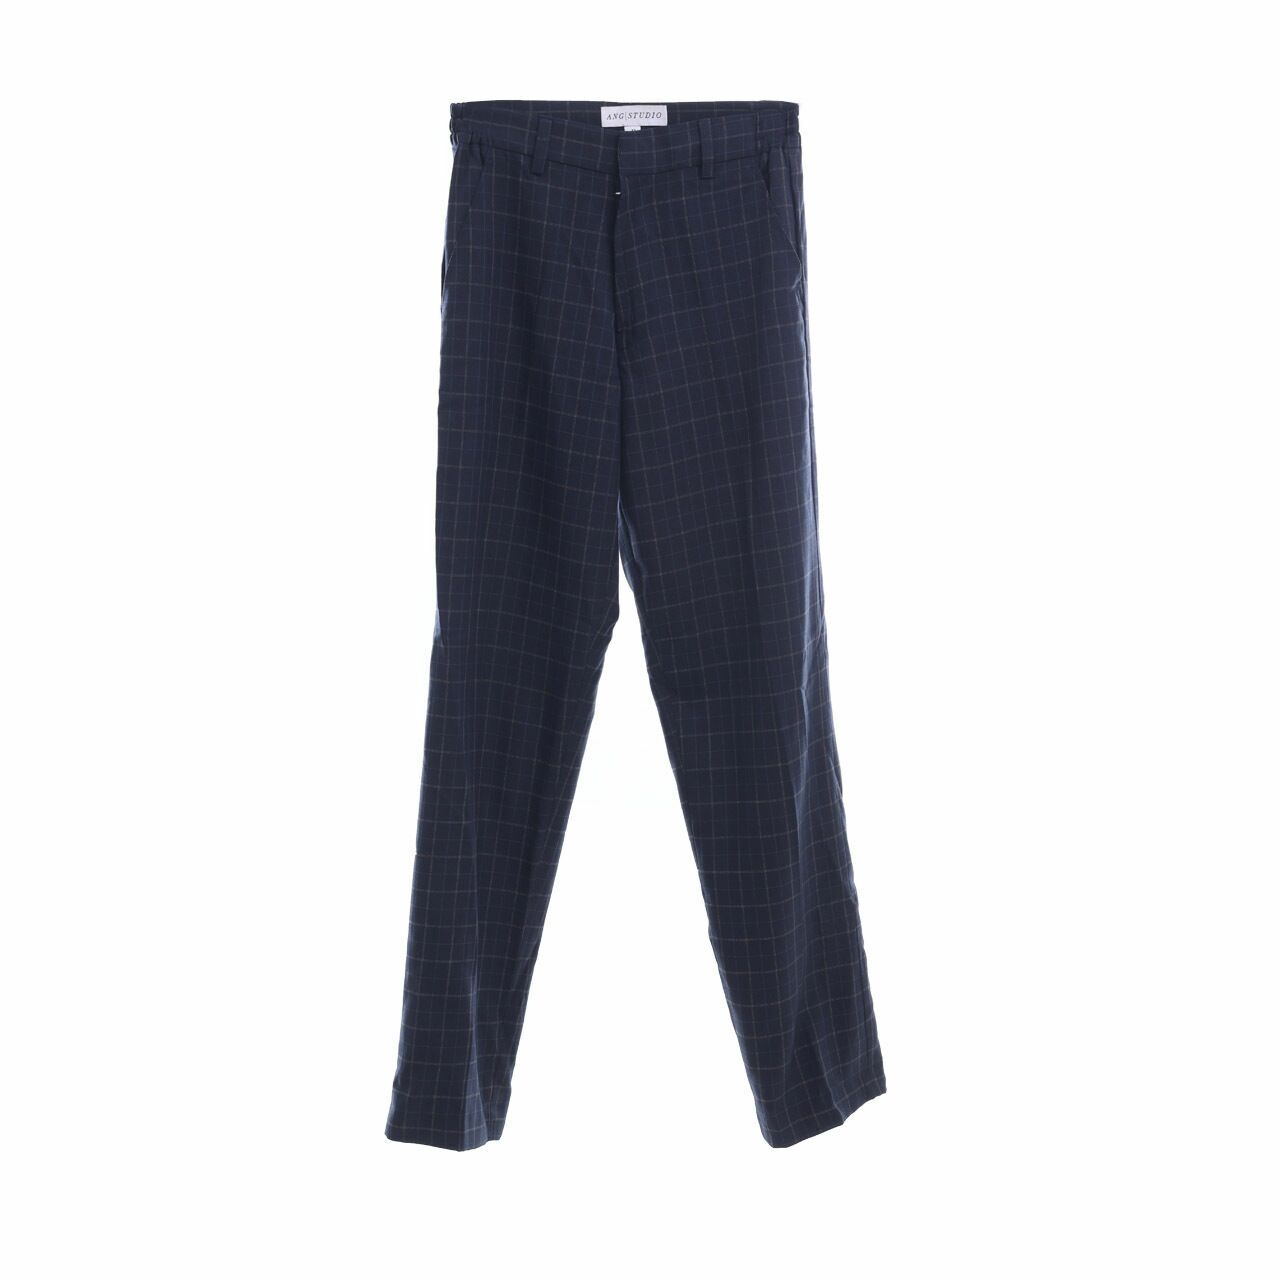 ANG STUDIO Navy Checkered Trousers